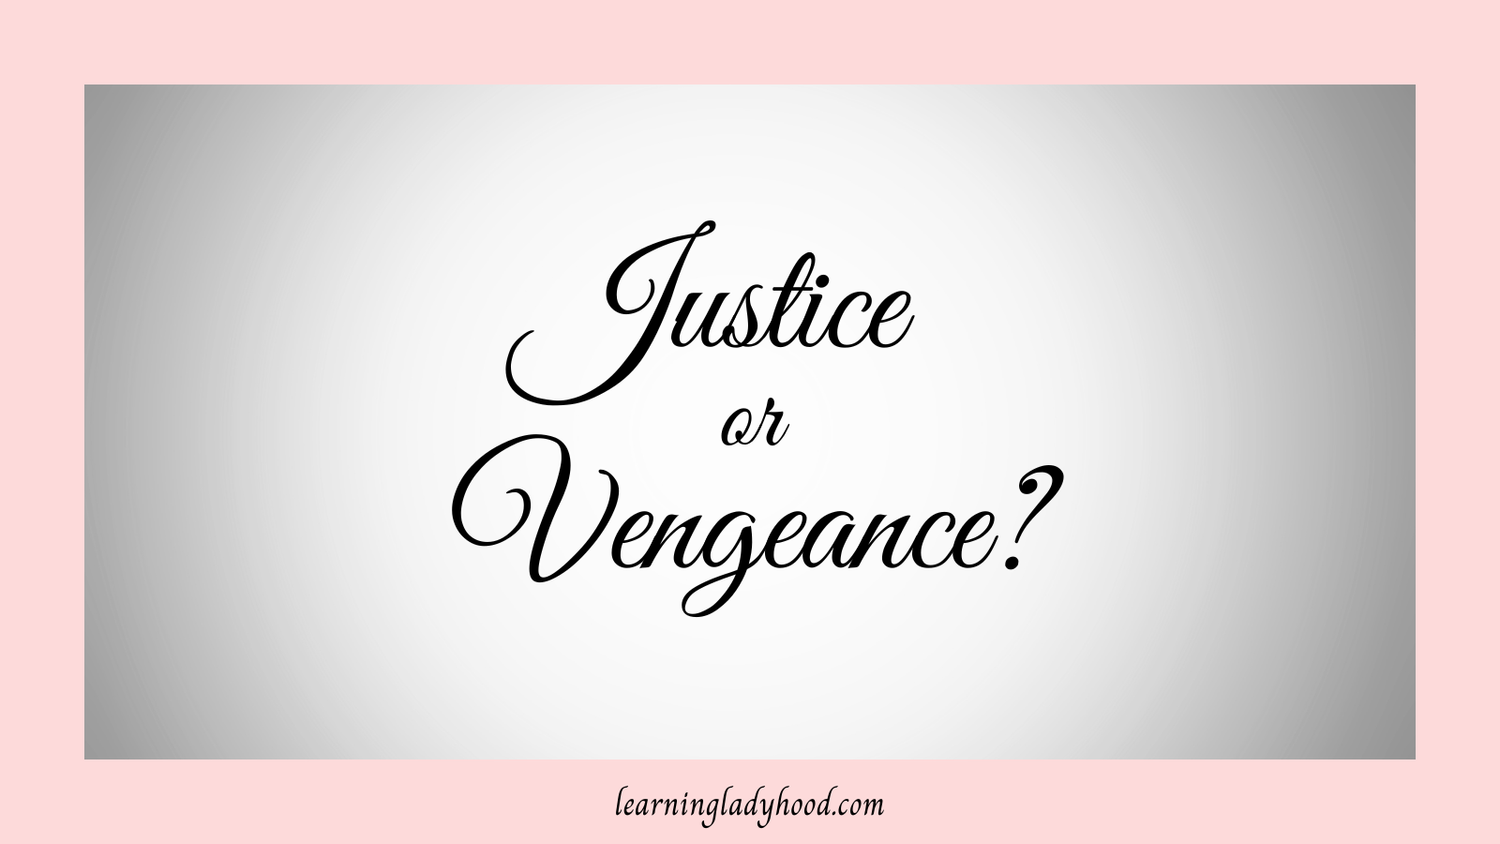 Vengeance Meaning 